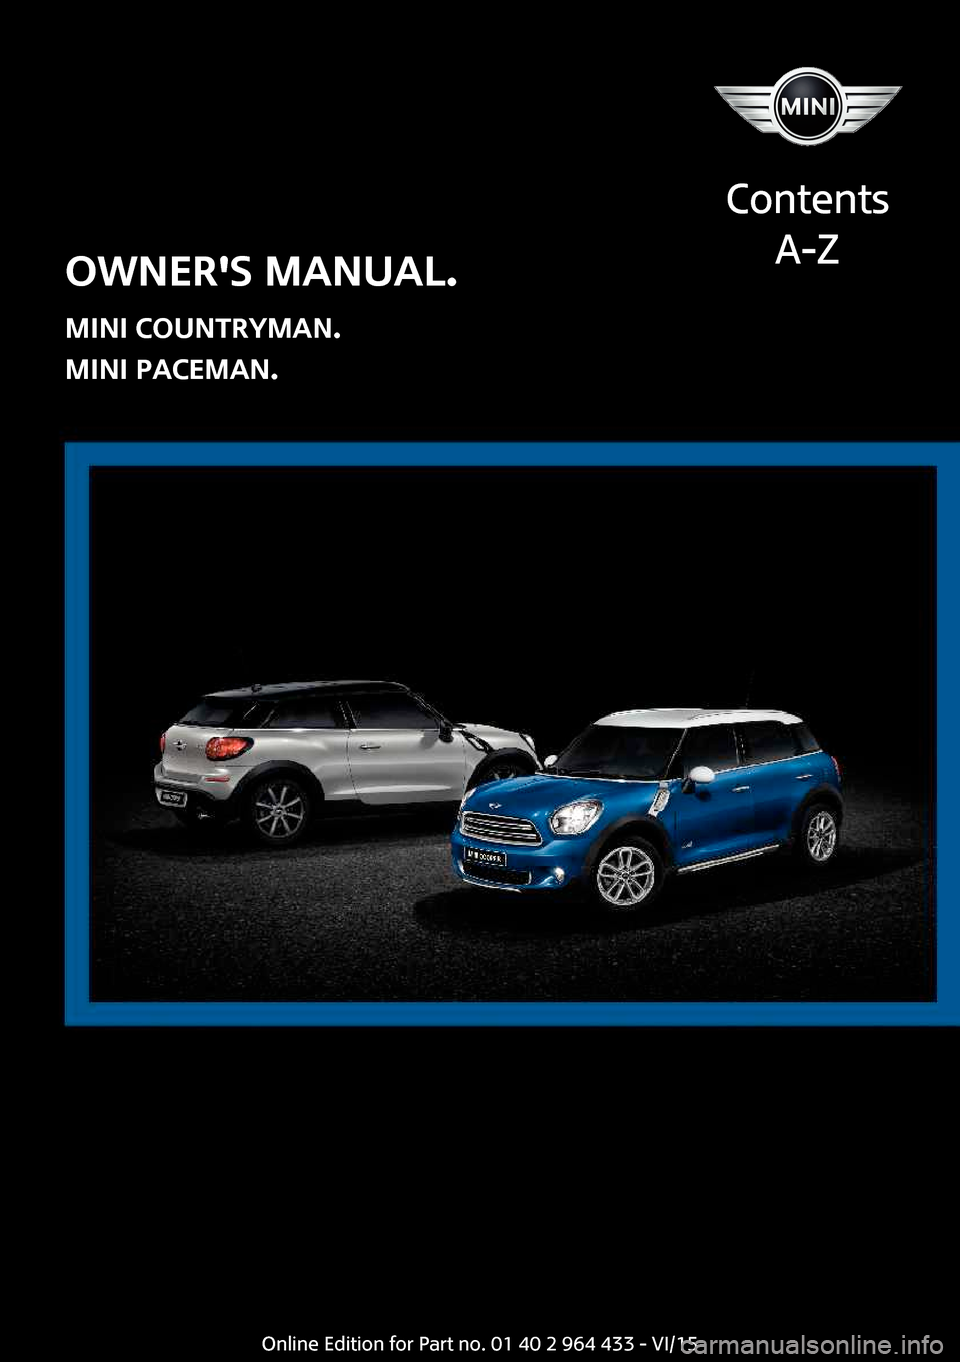 MINI Paceman 2016  Owners Manual OWNERS MANUAL.
MINI COUNTRYMAN.
MINI PACEMAN.
Contents
A-ZOnline Edition for Part no. 01 40 2 964 433 - VI/15  